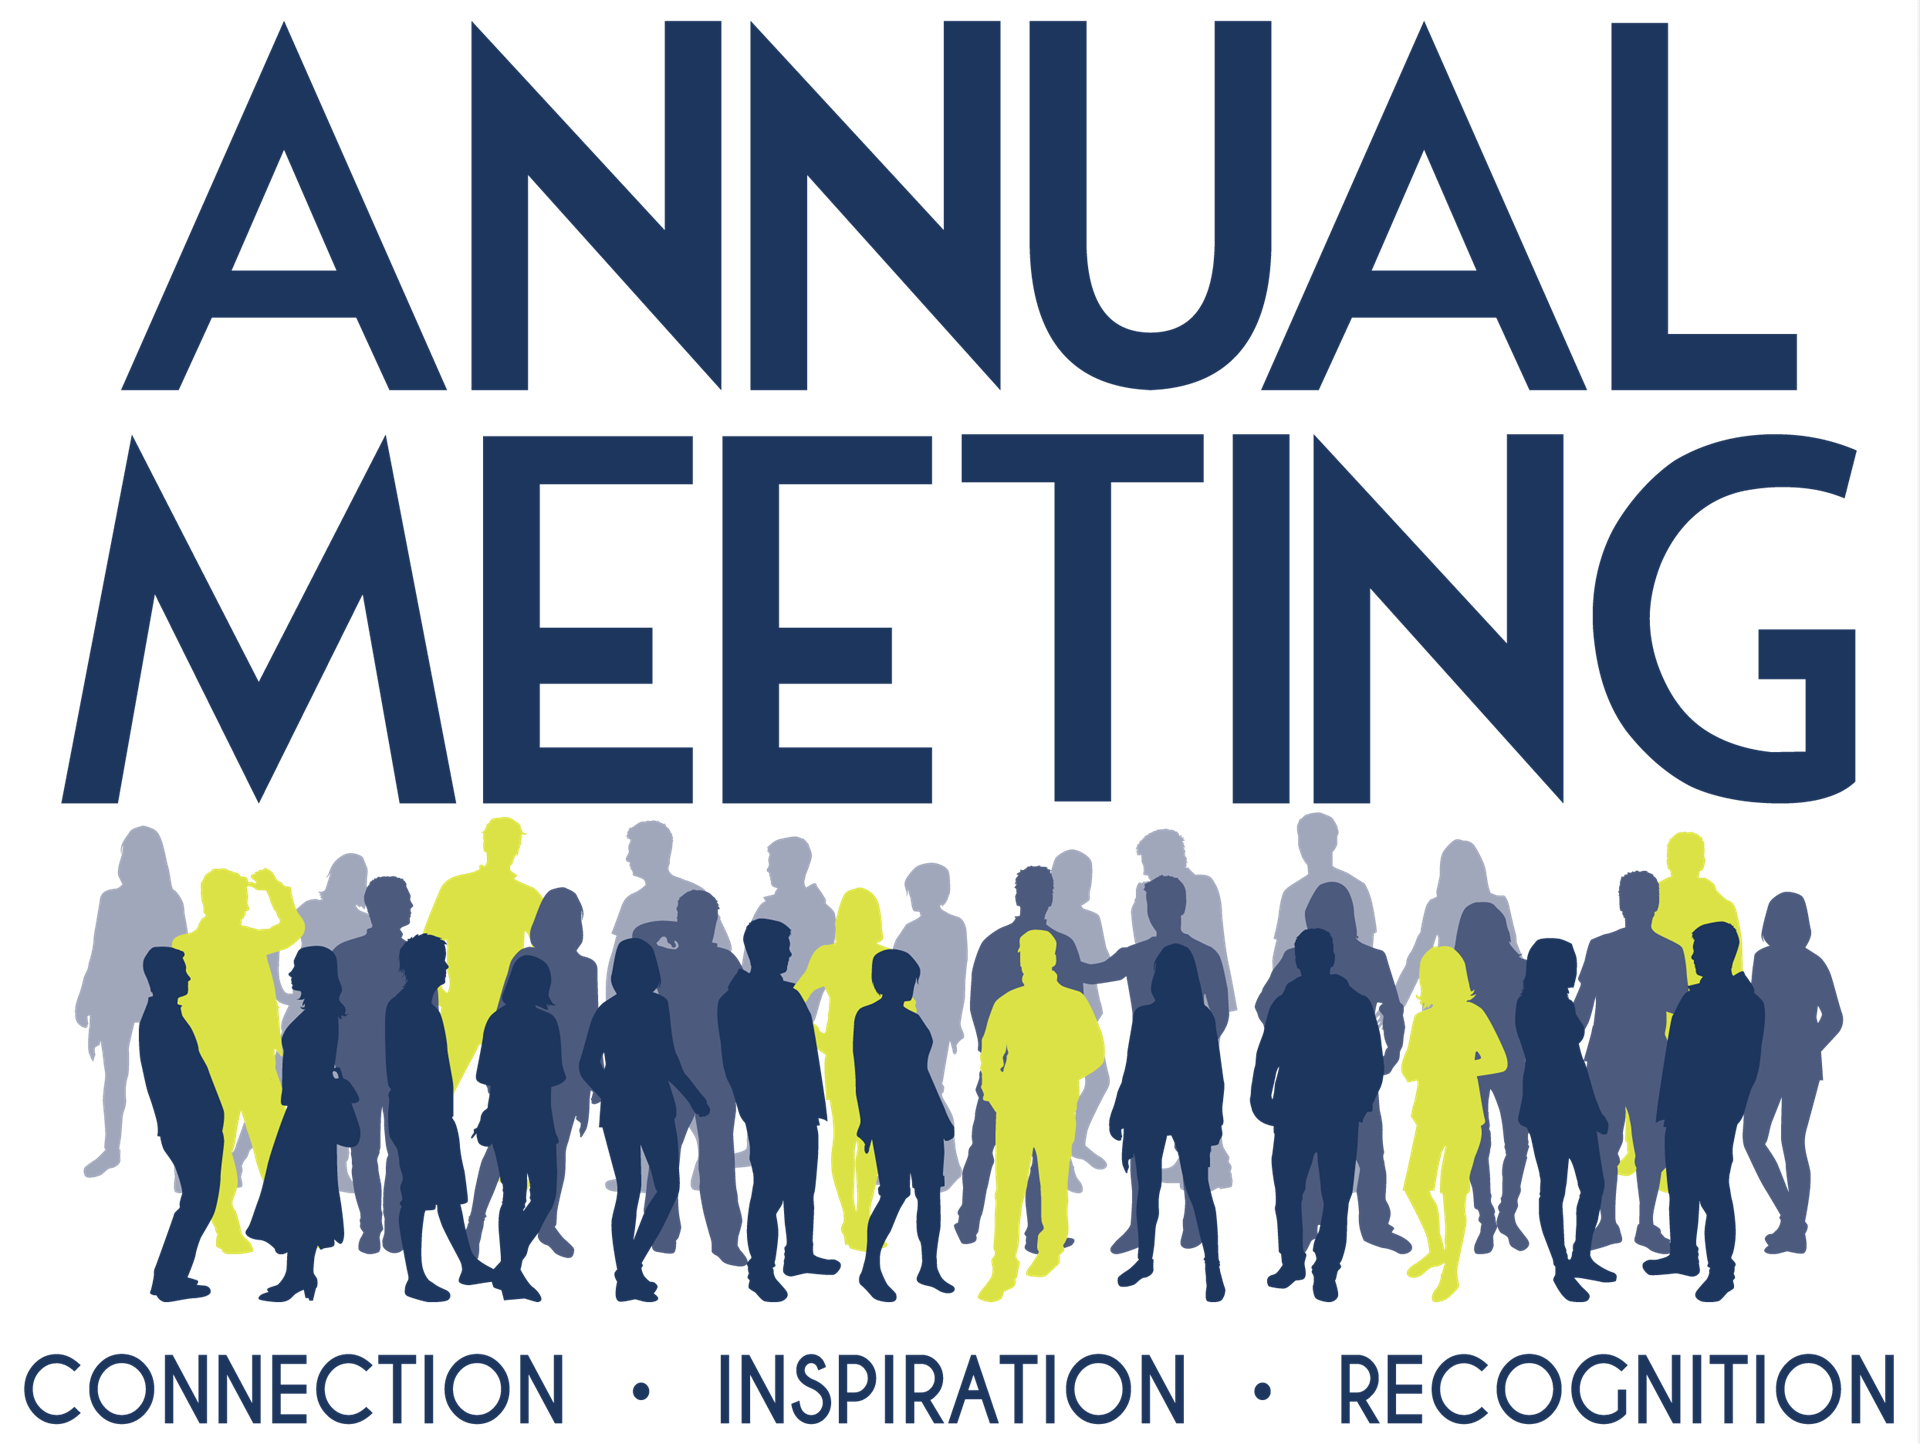 This year we were not able to host our ANNUAL MEETING, therefore the